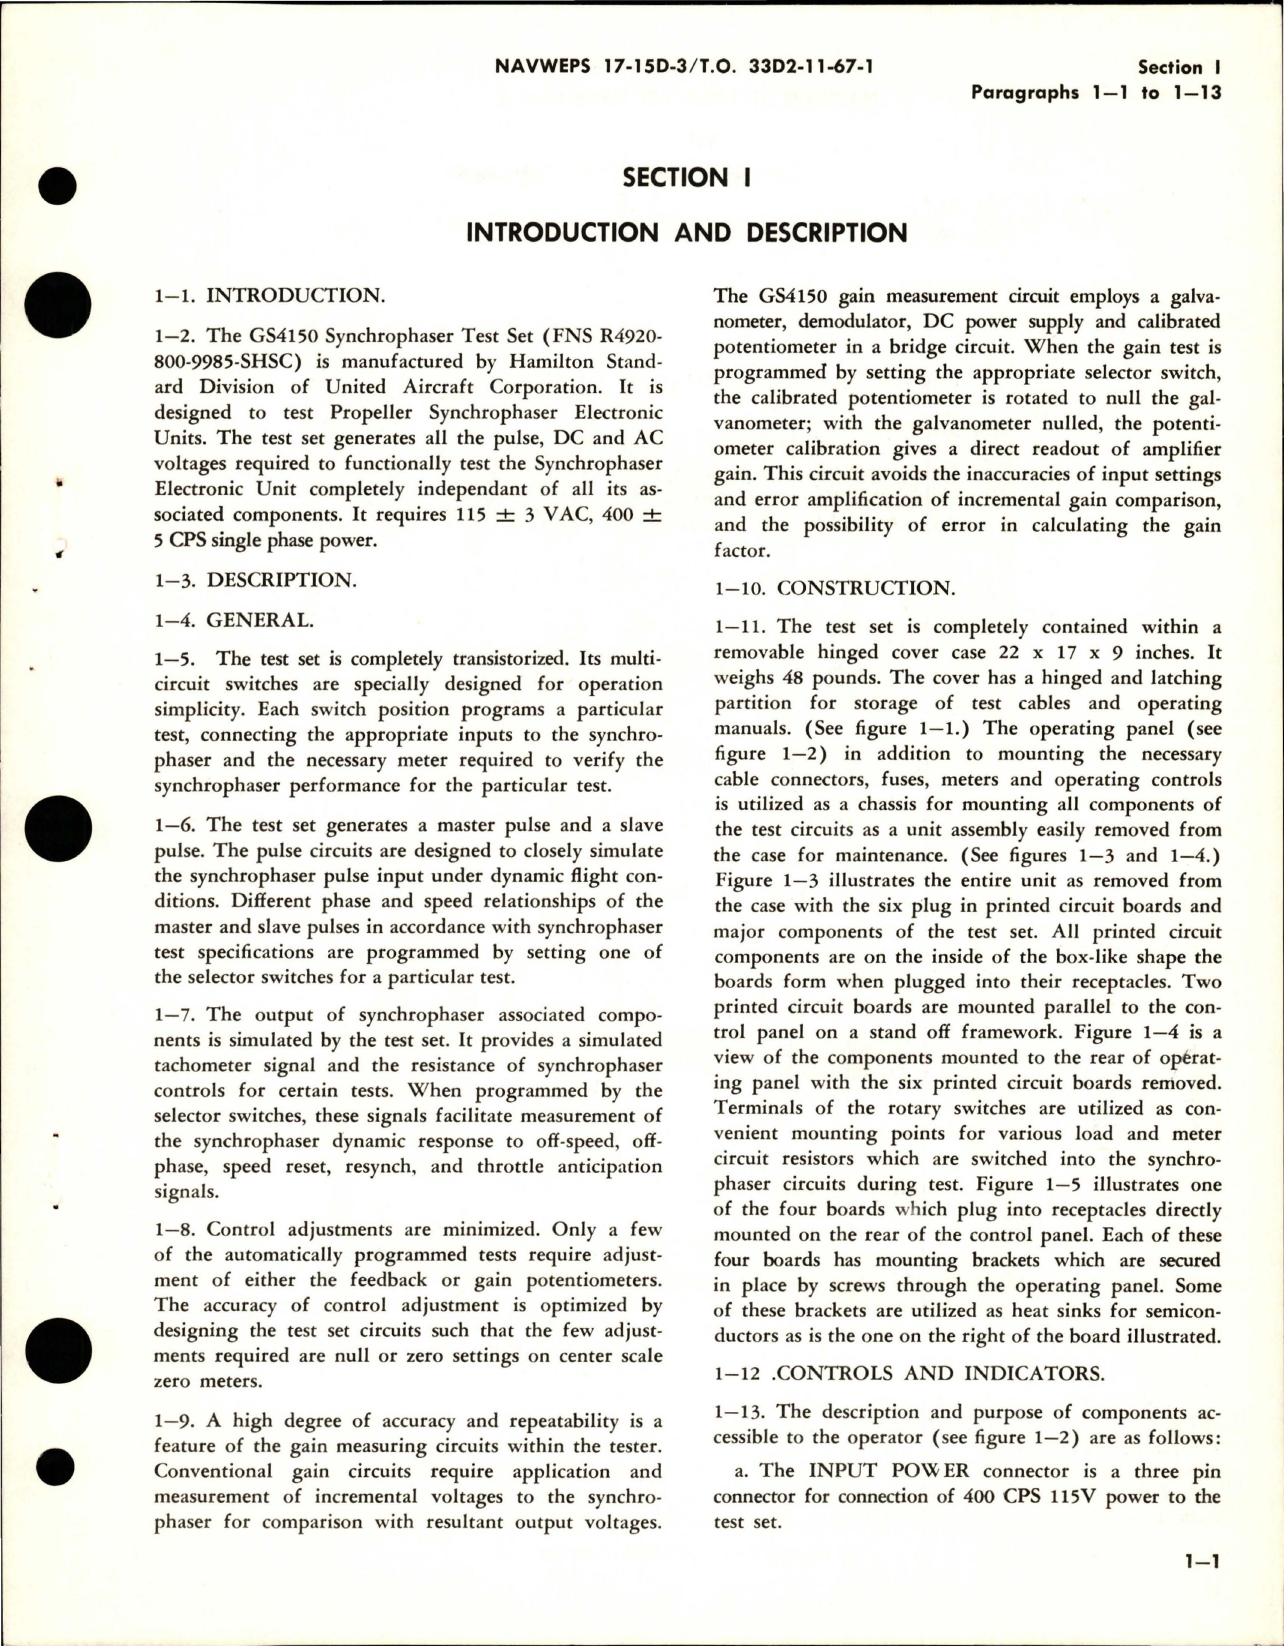 Sample page 5 from AirCorps Library document: Operation, Service Instructions with Illustrated Parts Breakdown for Synchrophaser Test Set - Part GS4150 